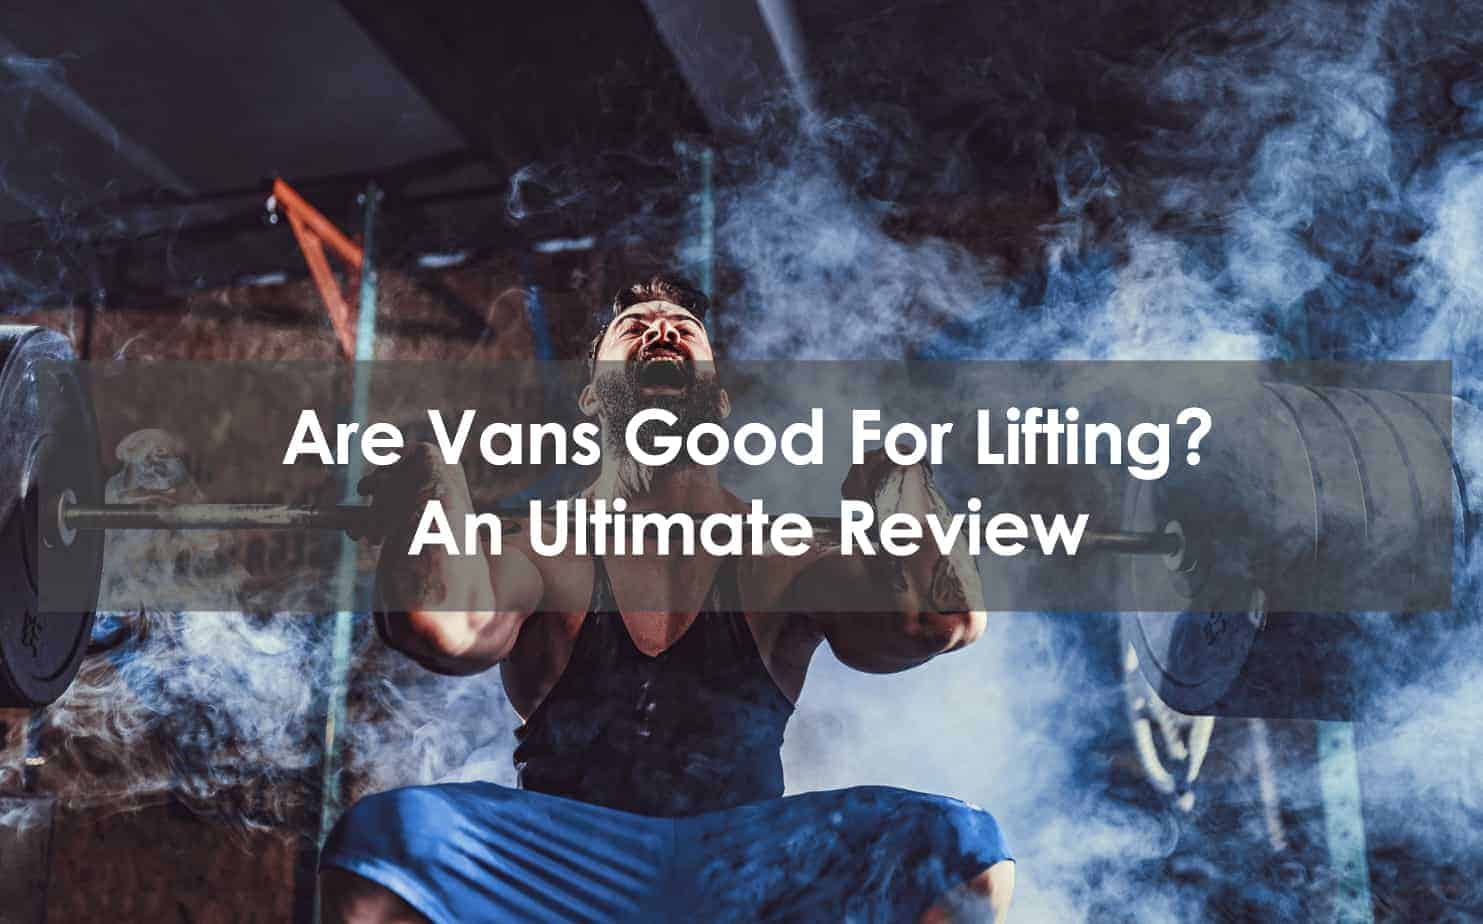 Are Vans Good For Lifting? An Ultimate Review